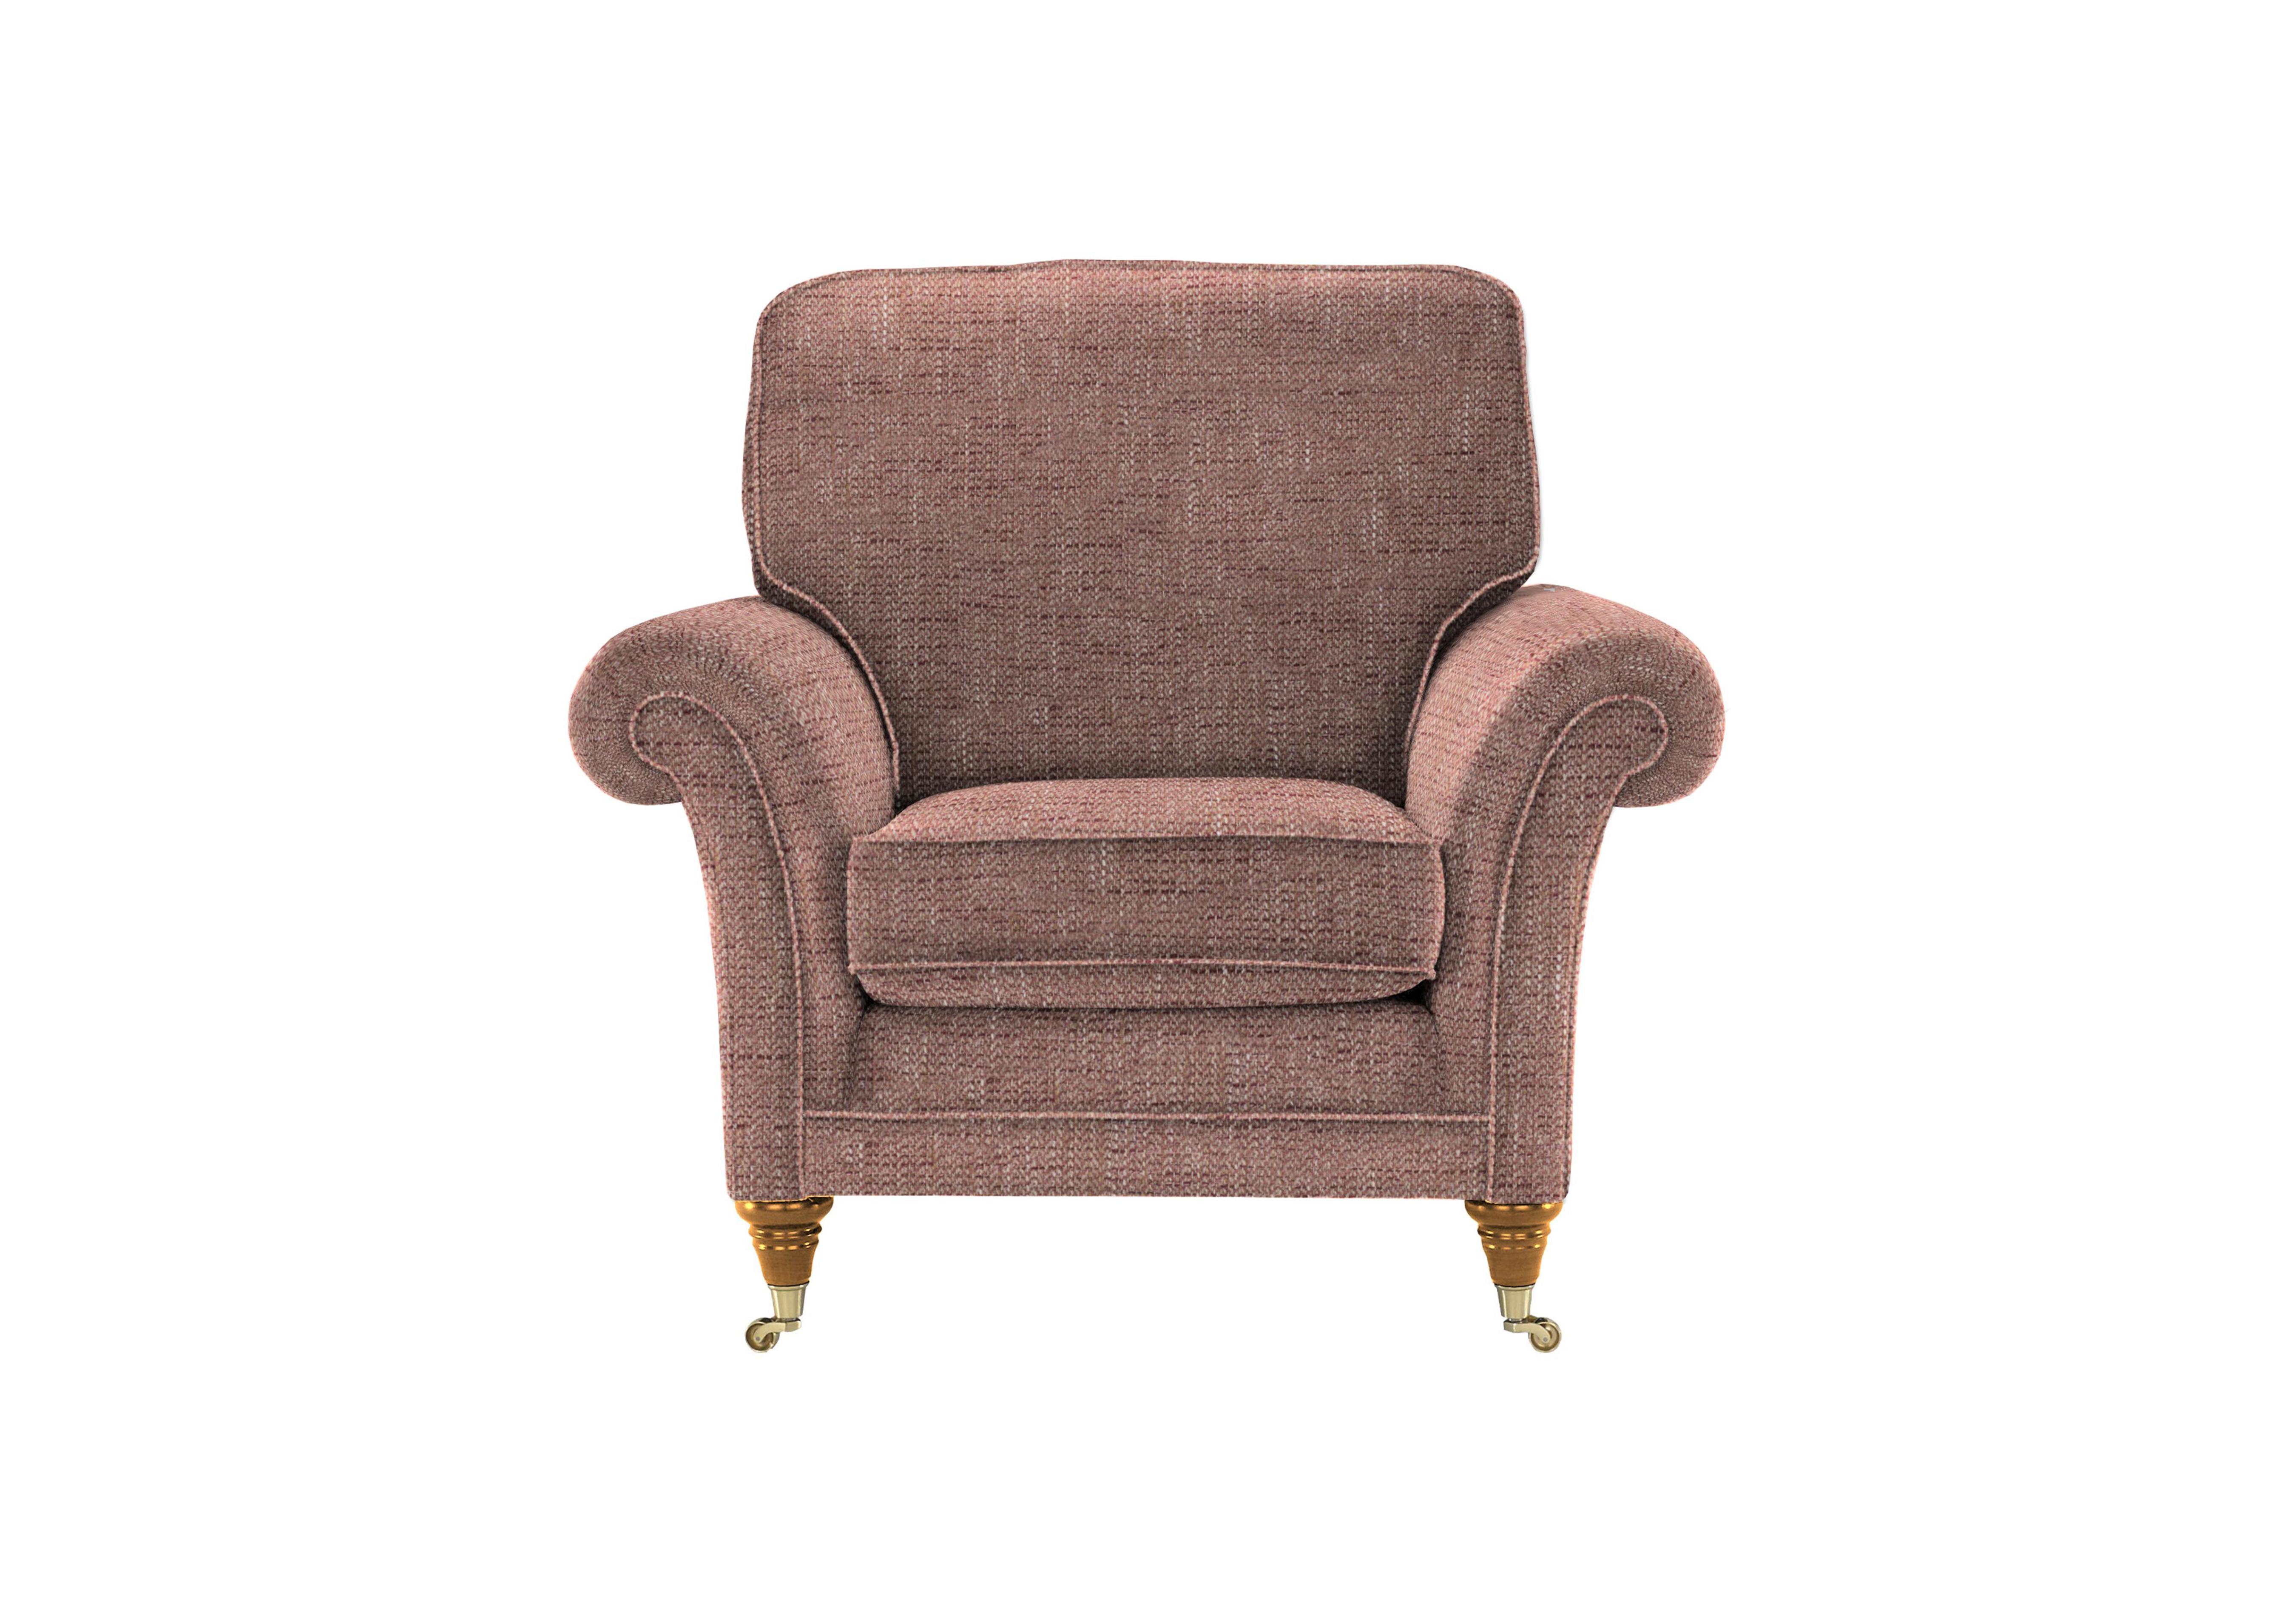 Burghley Fabric Armchair in 001408-0003 Country Rose on Furniture Village